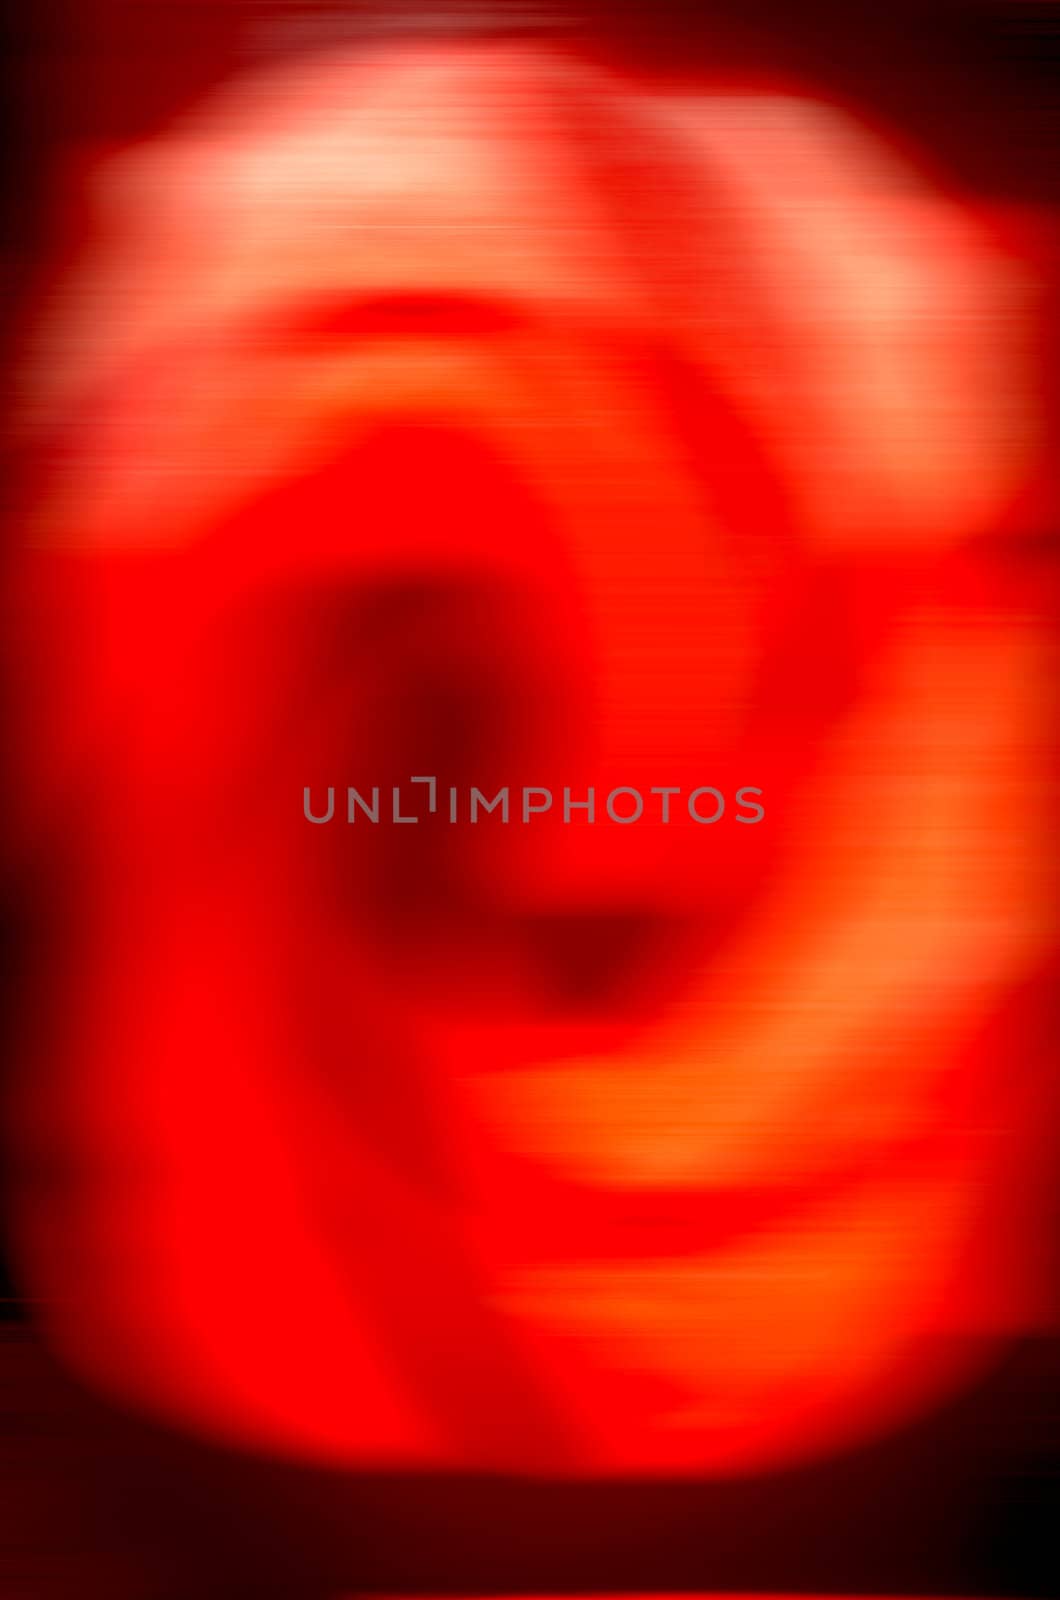 Interesting image blur. Blurred red circle. Abstract background.